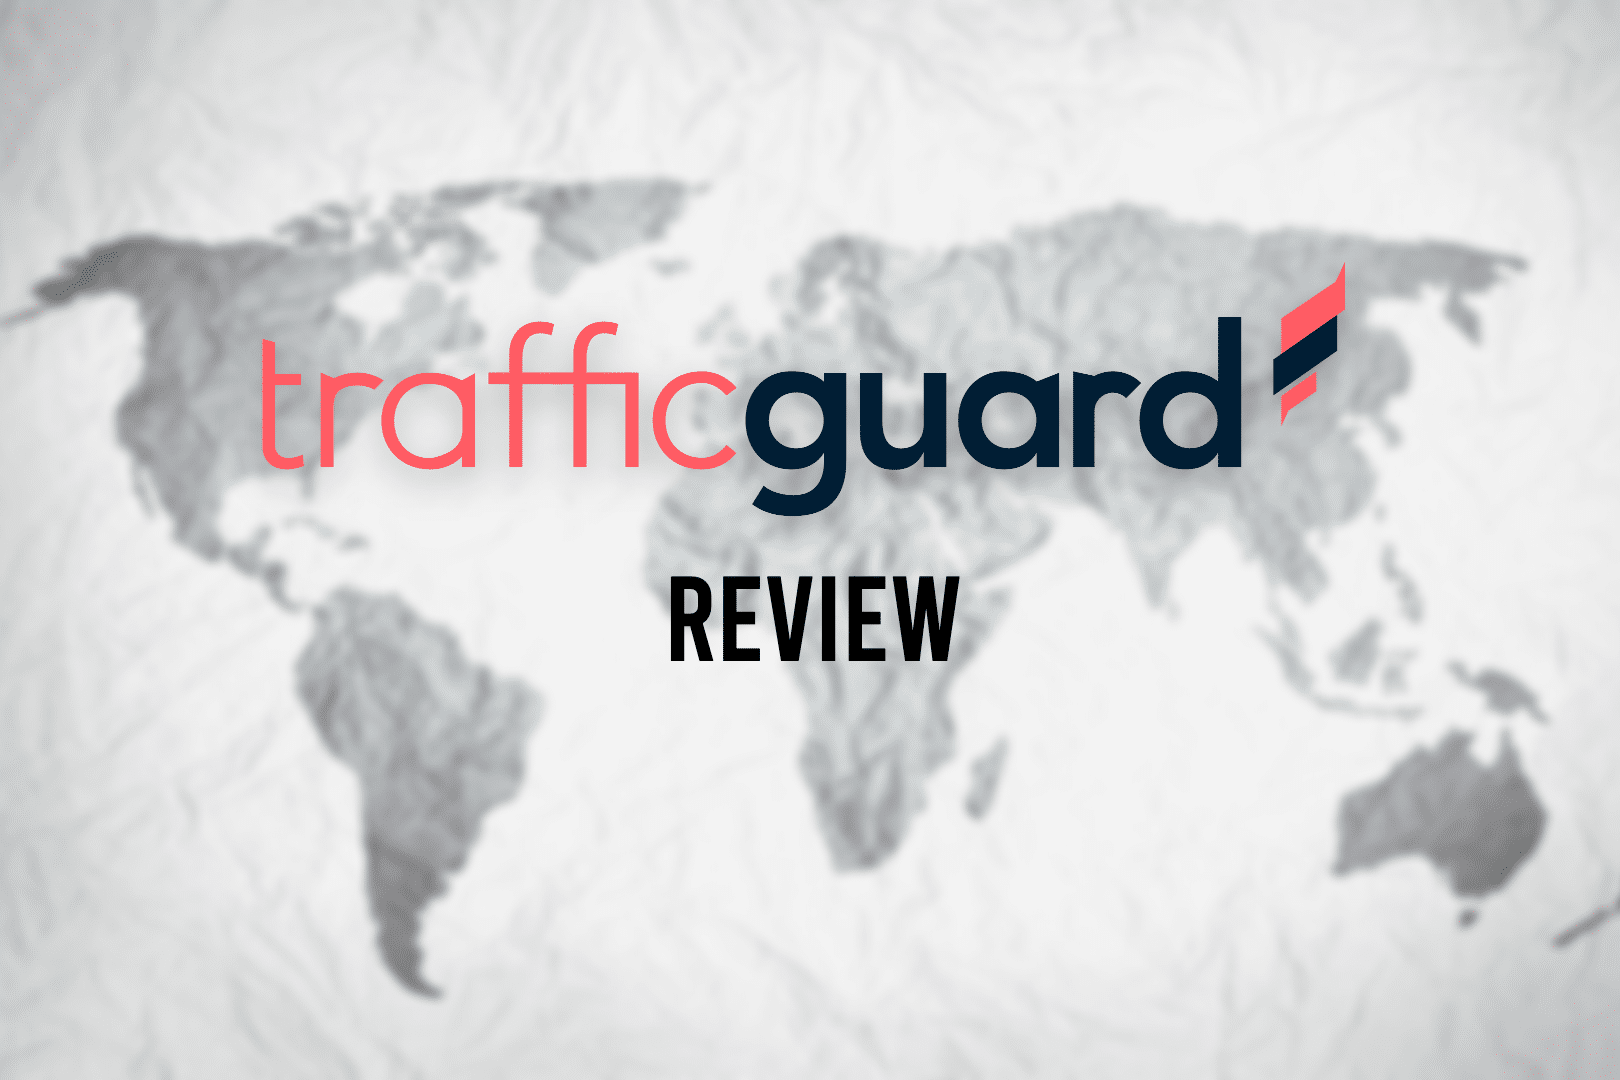 traffic guard review